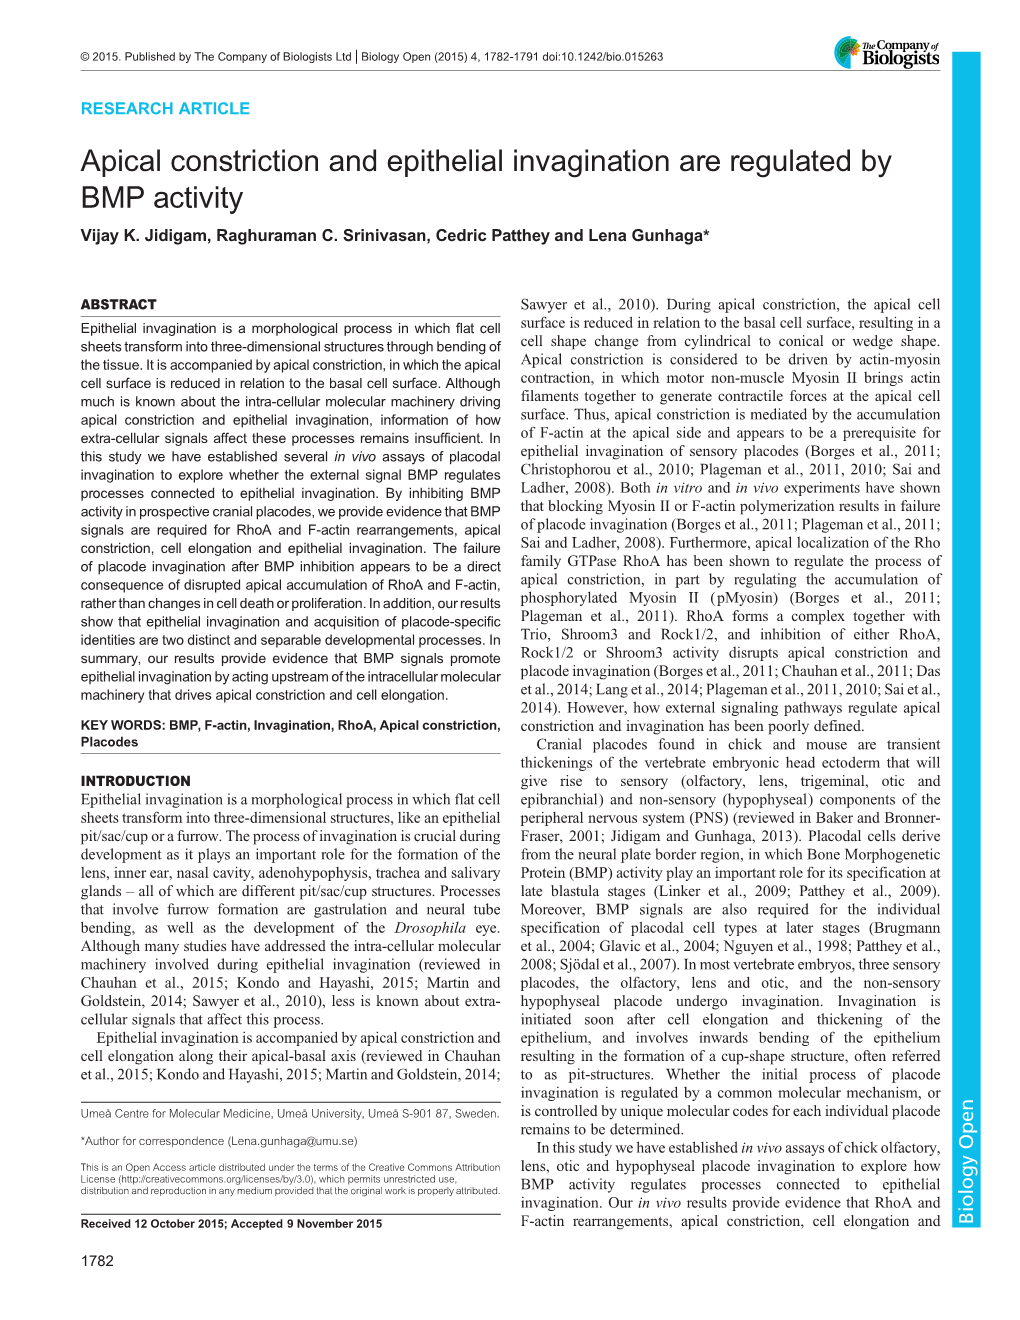 Apical Constriction and Epithelial Invagination Are Regulated by BMP Activity Vijay K